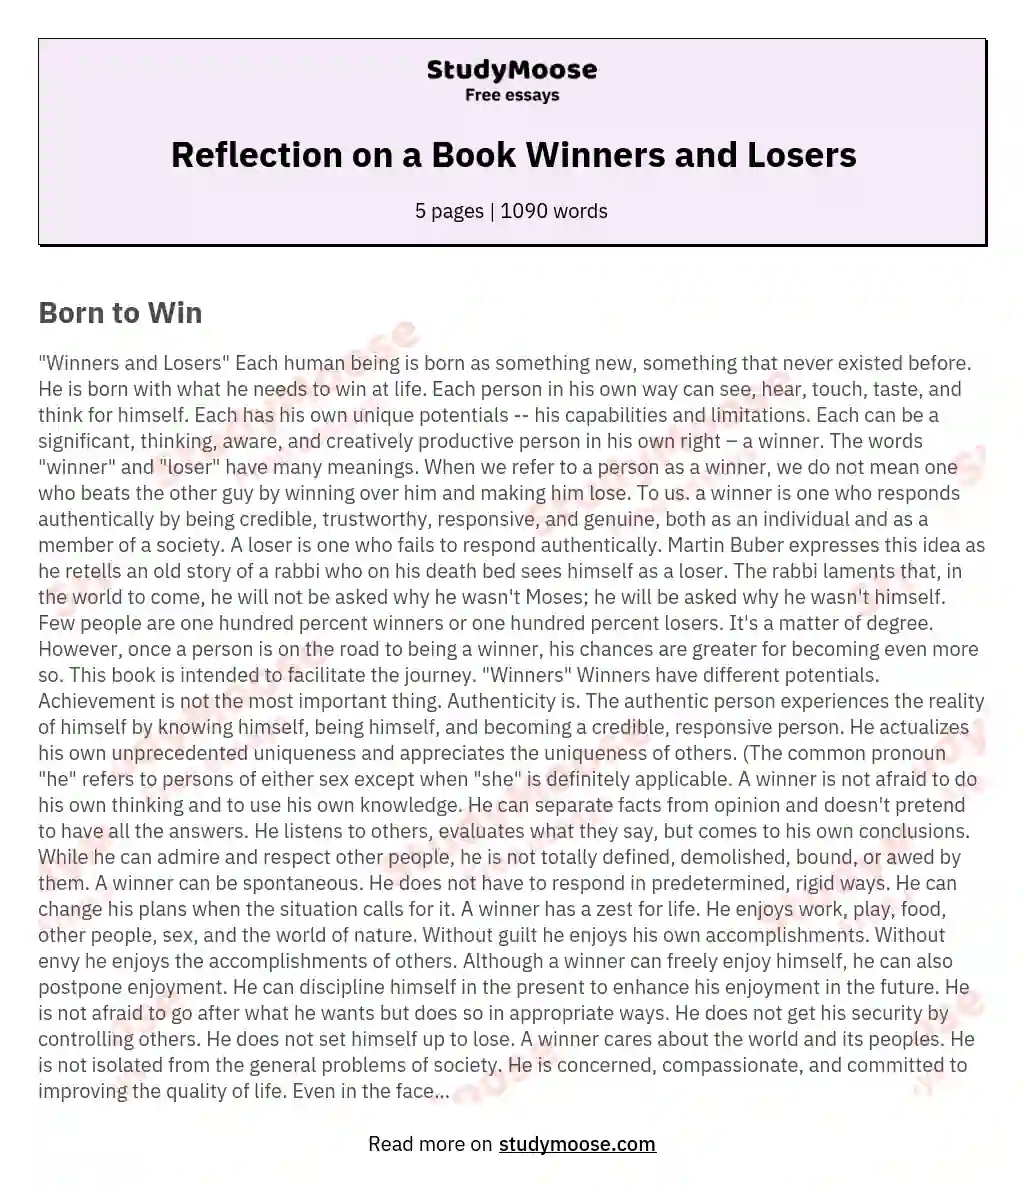 Reflection on a Book Winners and Losers essay